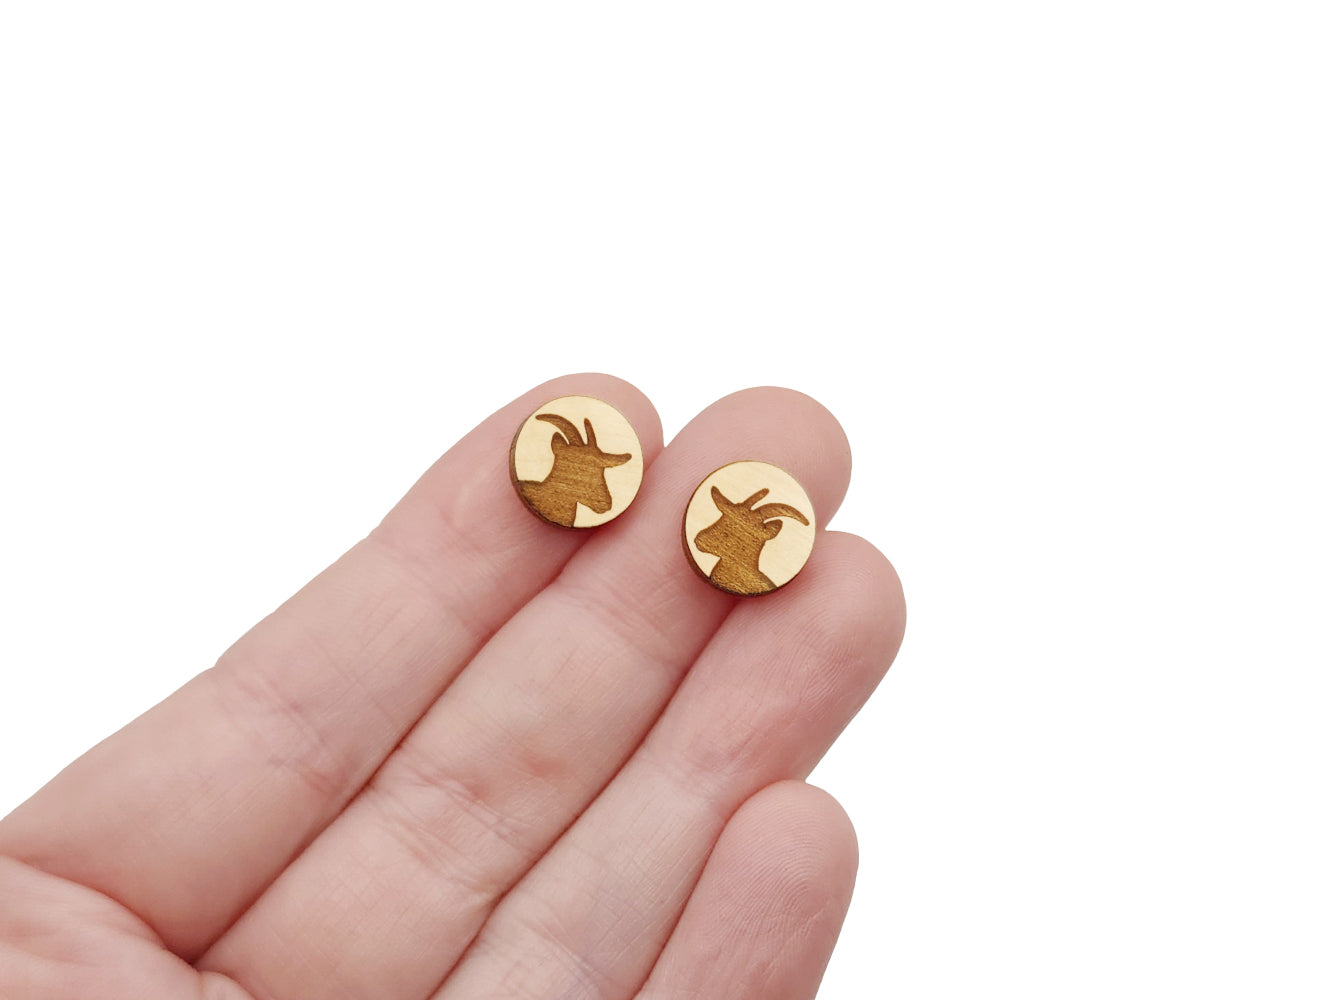 a hand holding a pair of round wooden cabochon earring blanks engraved with a goat silhouette